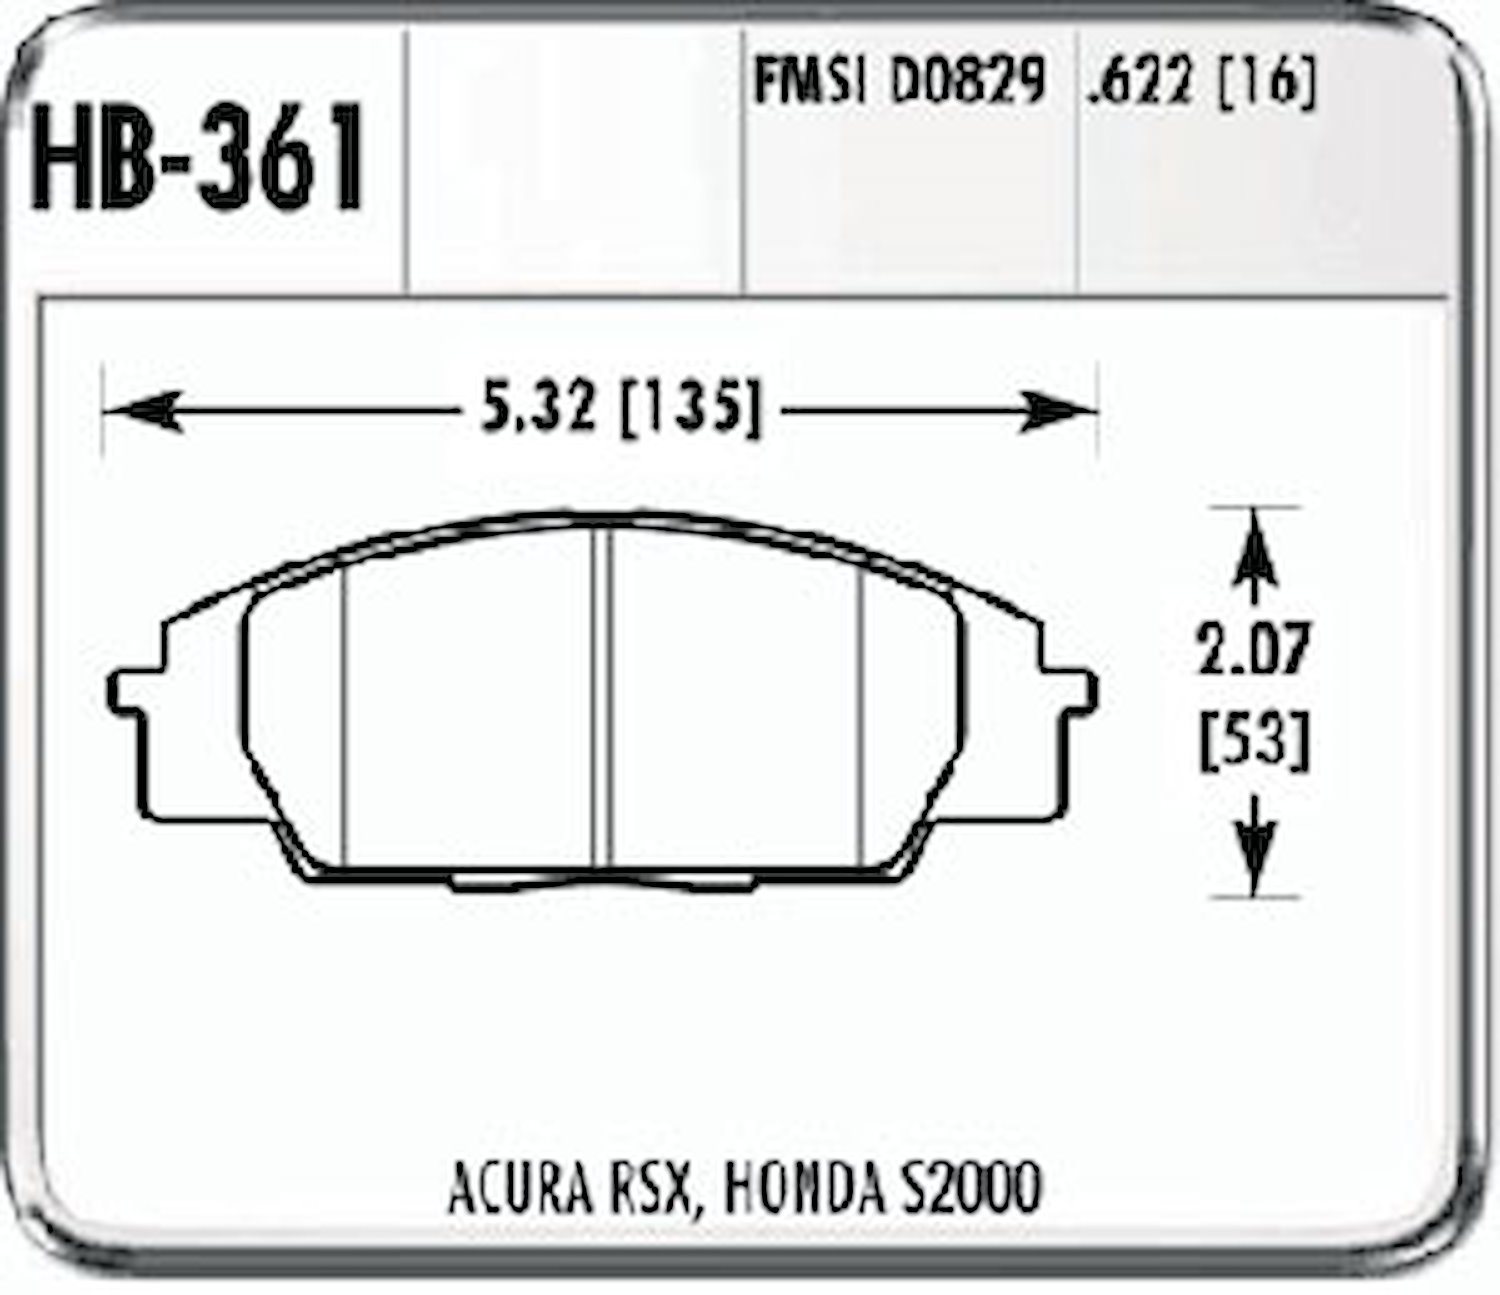 Hawk High Performance Front Brake Pads Fits: 2002-04 RSX Type-S